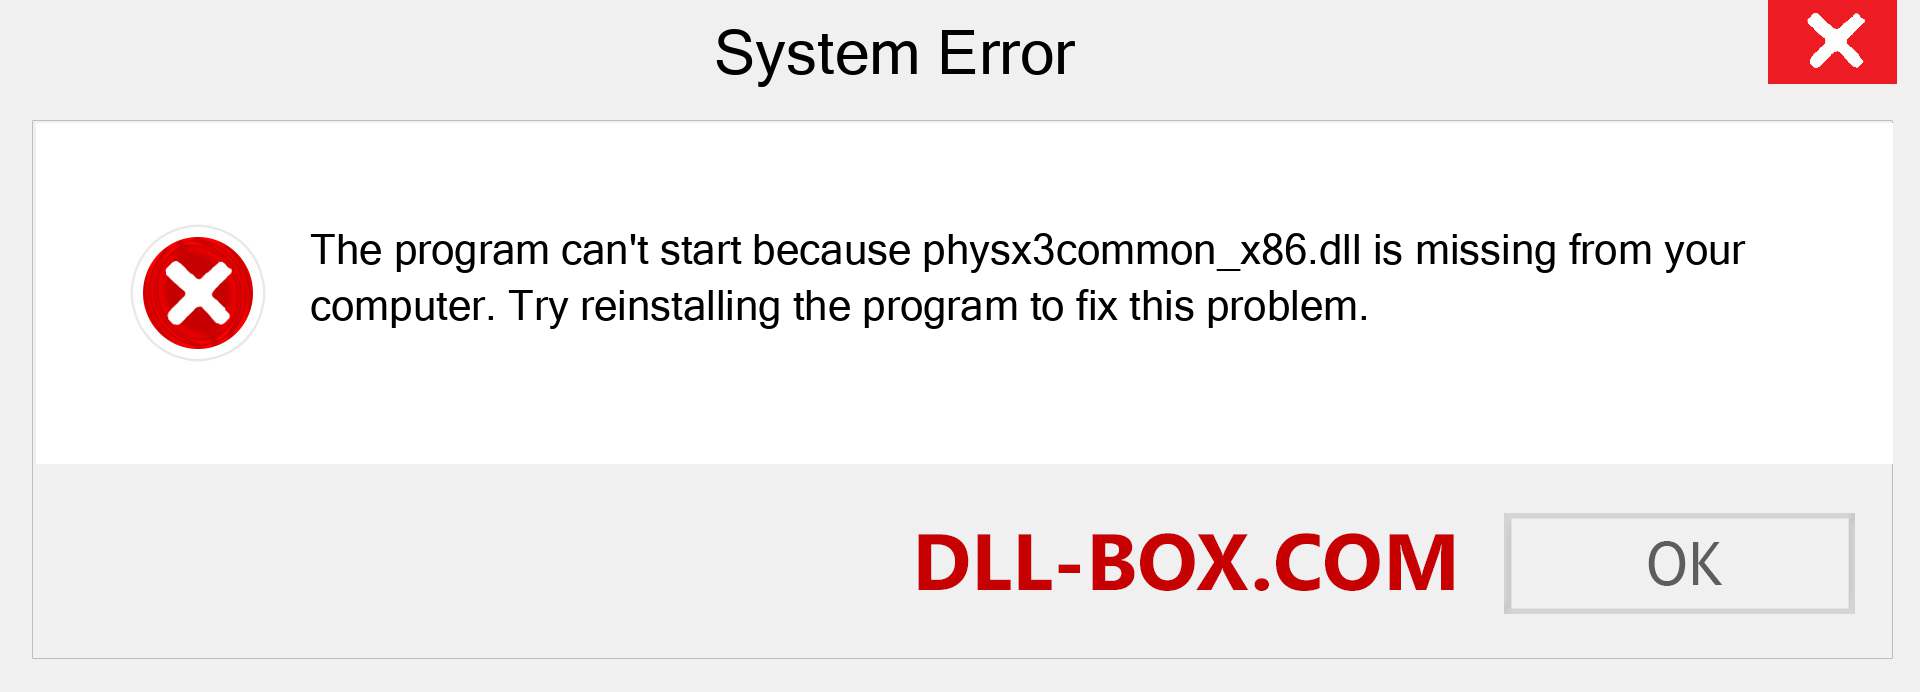  physx3common_x86.dll file is missing?. Download for Windows 7, 8, 10 - Fix  physx3common_x86 dll Missing Error on Windows, photos, images